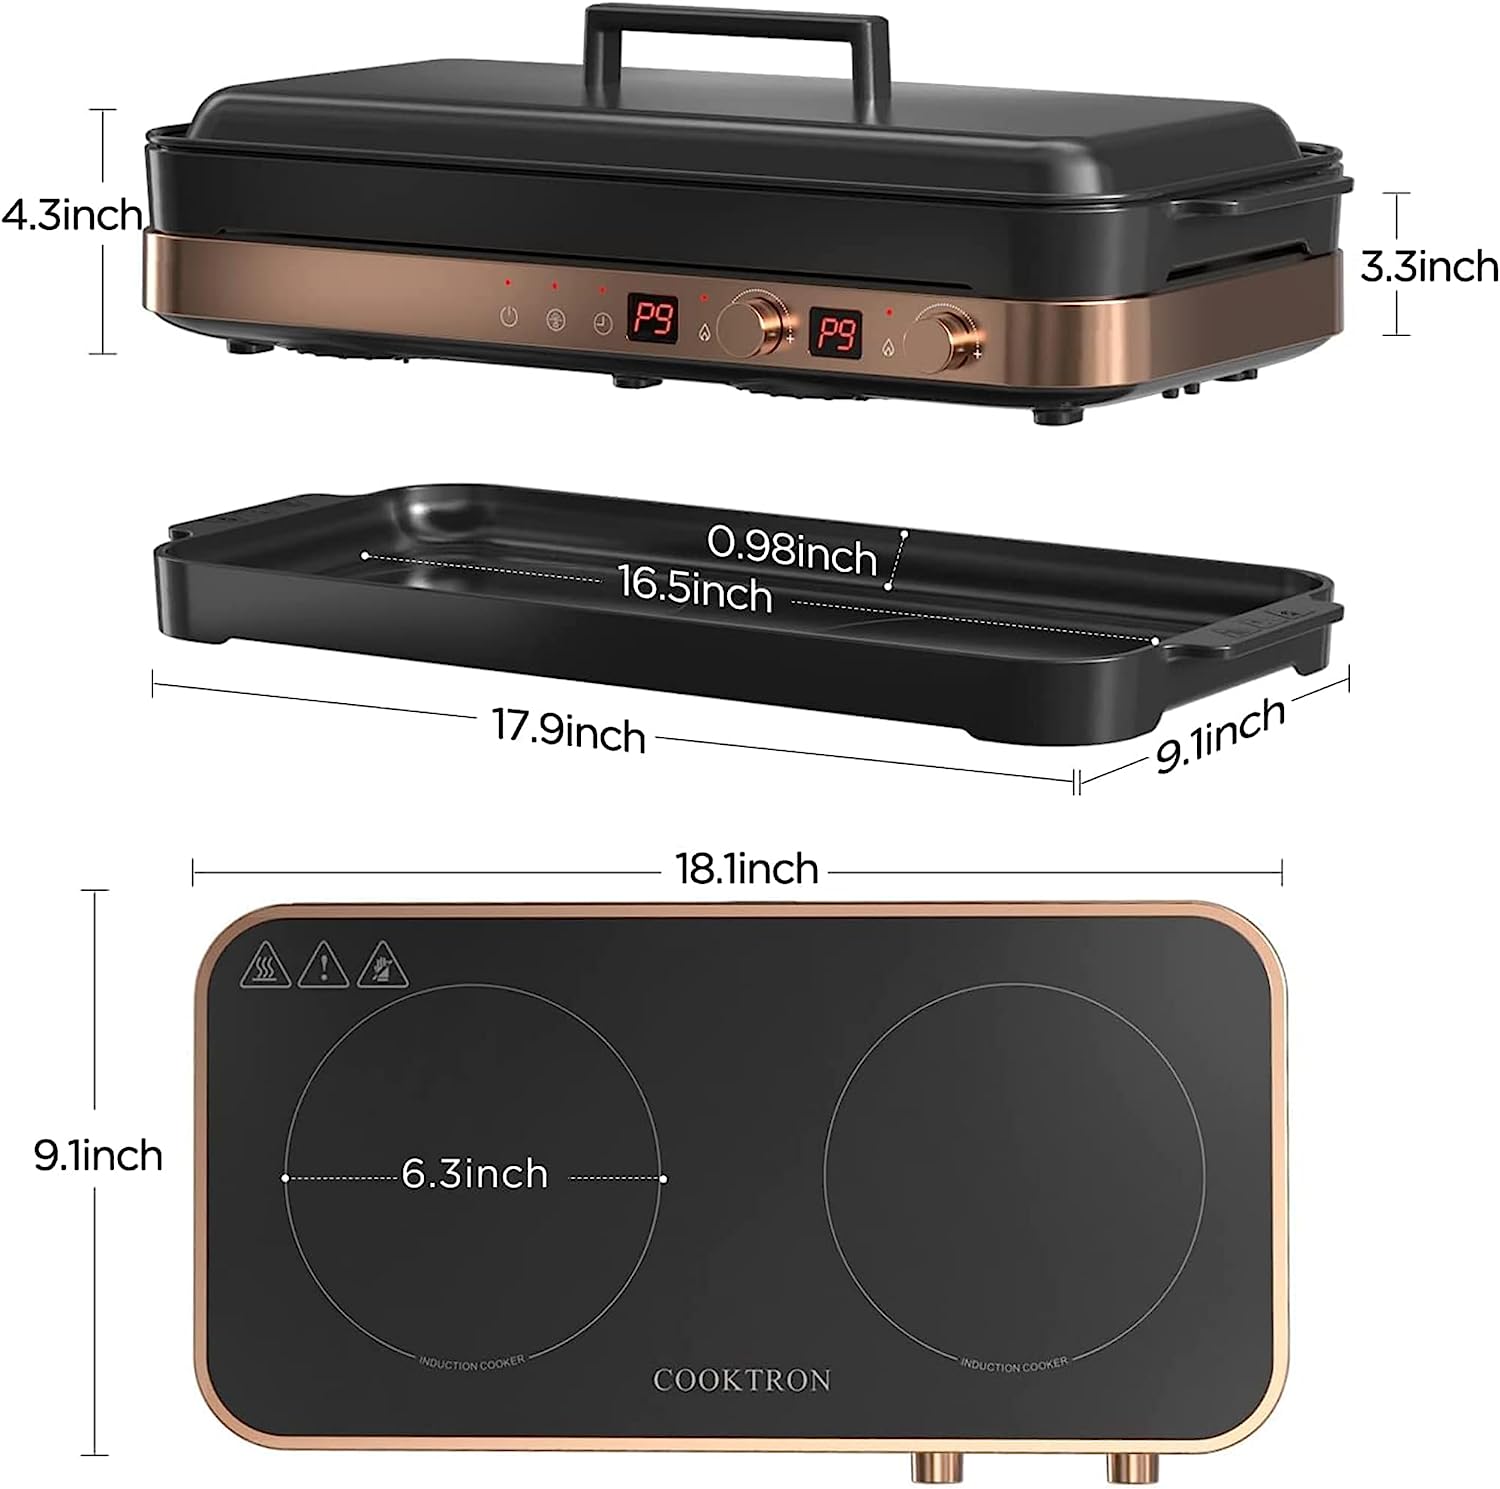 Cooktron Portable Double Burner Electric Induction Cooktop With